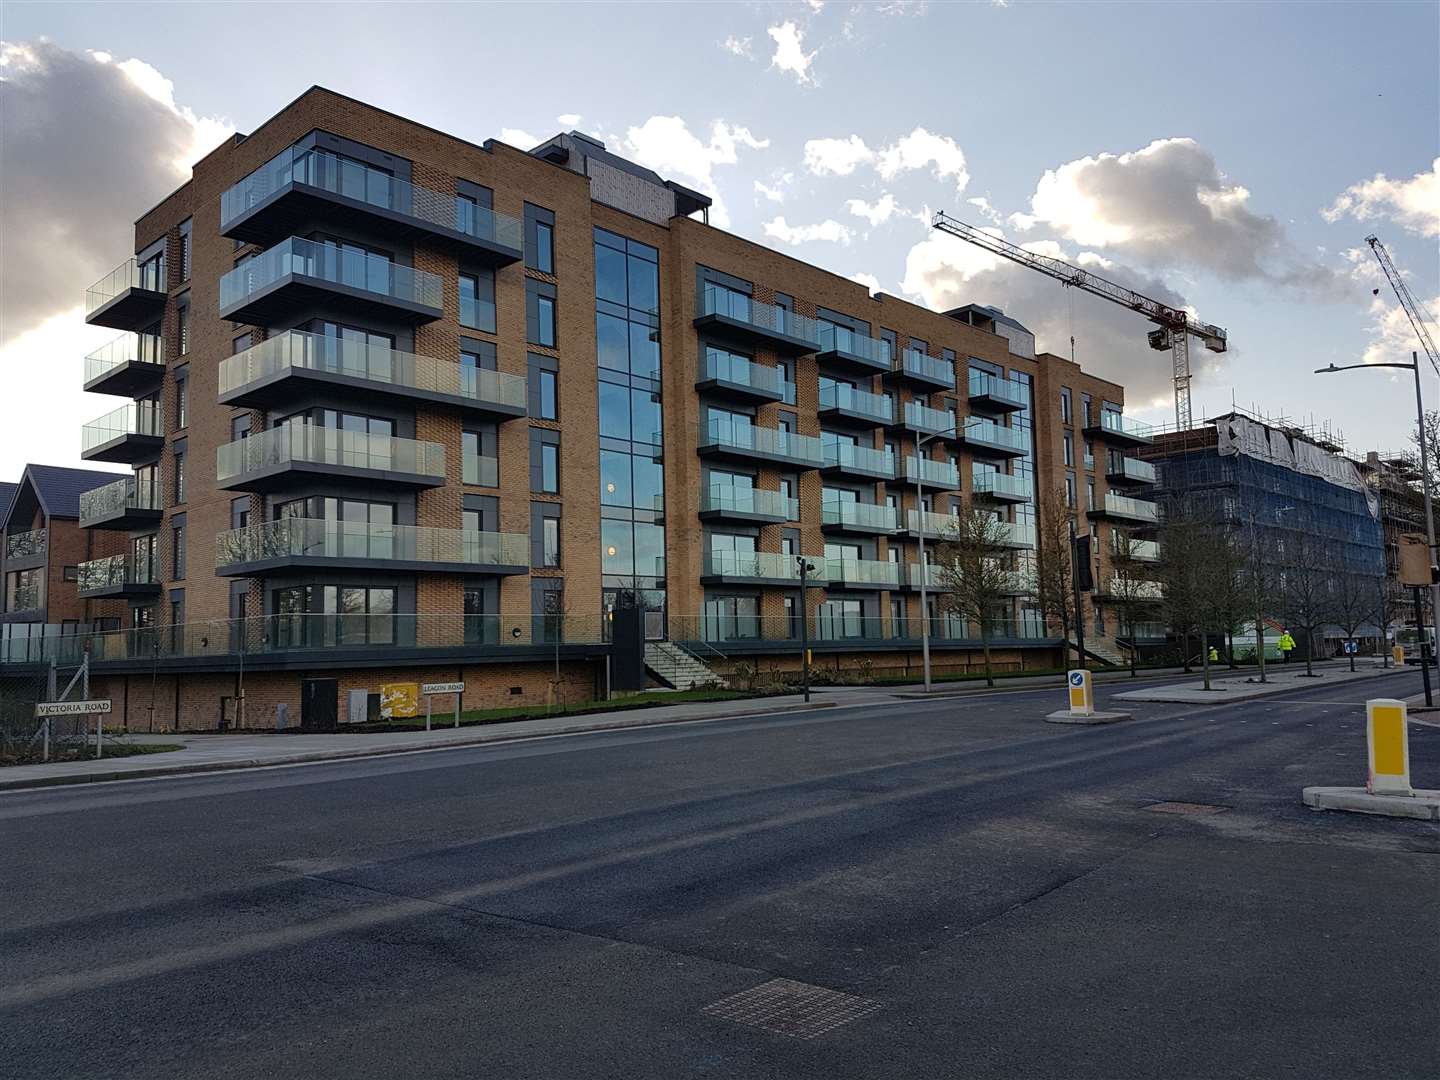 The first phase of the nearby Riverside Park development is nearing completion